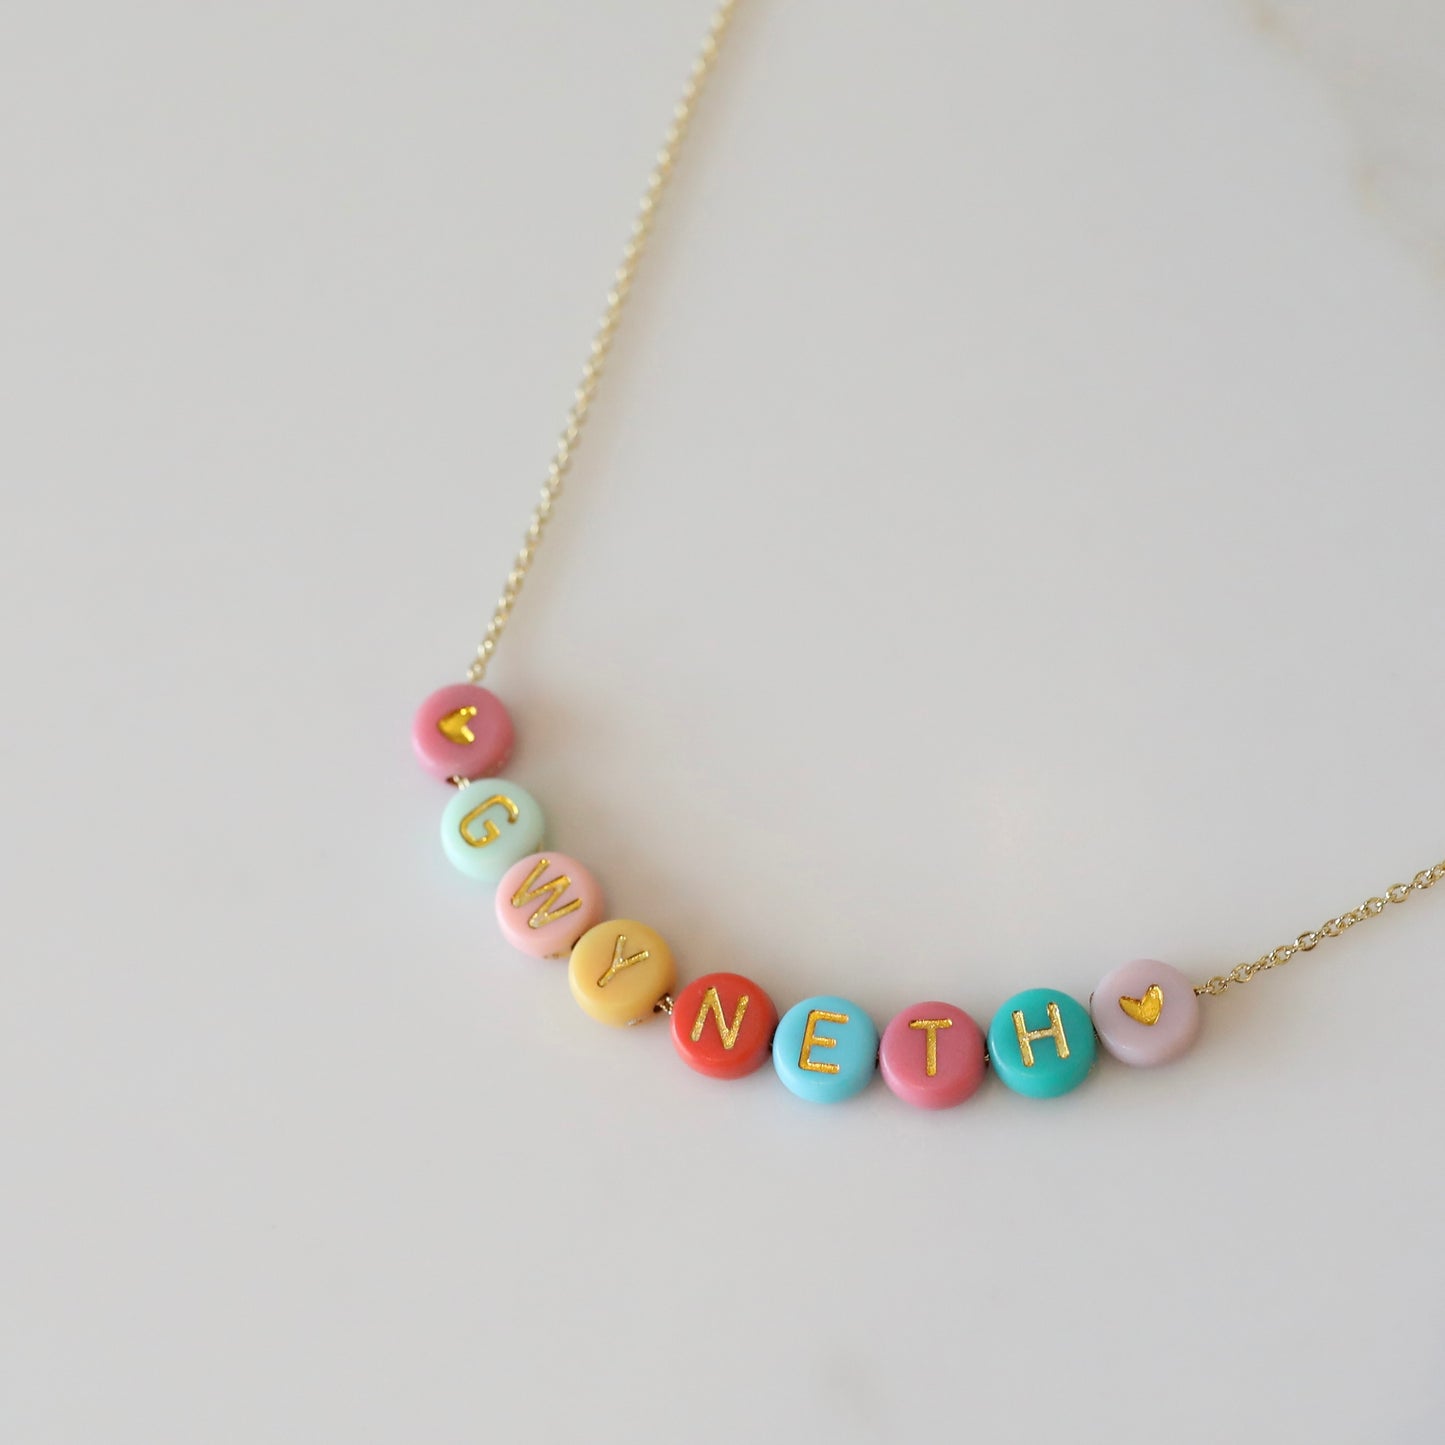 Rainbow Personalized Beads for the Necklace Kit